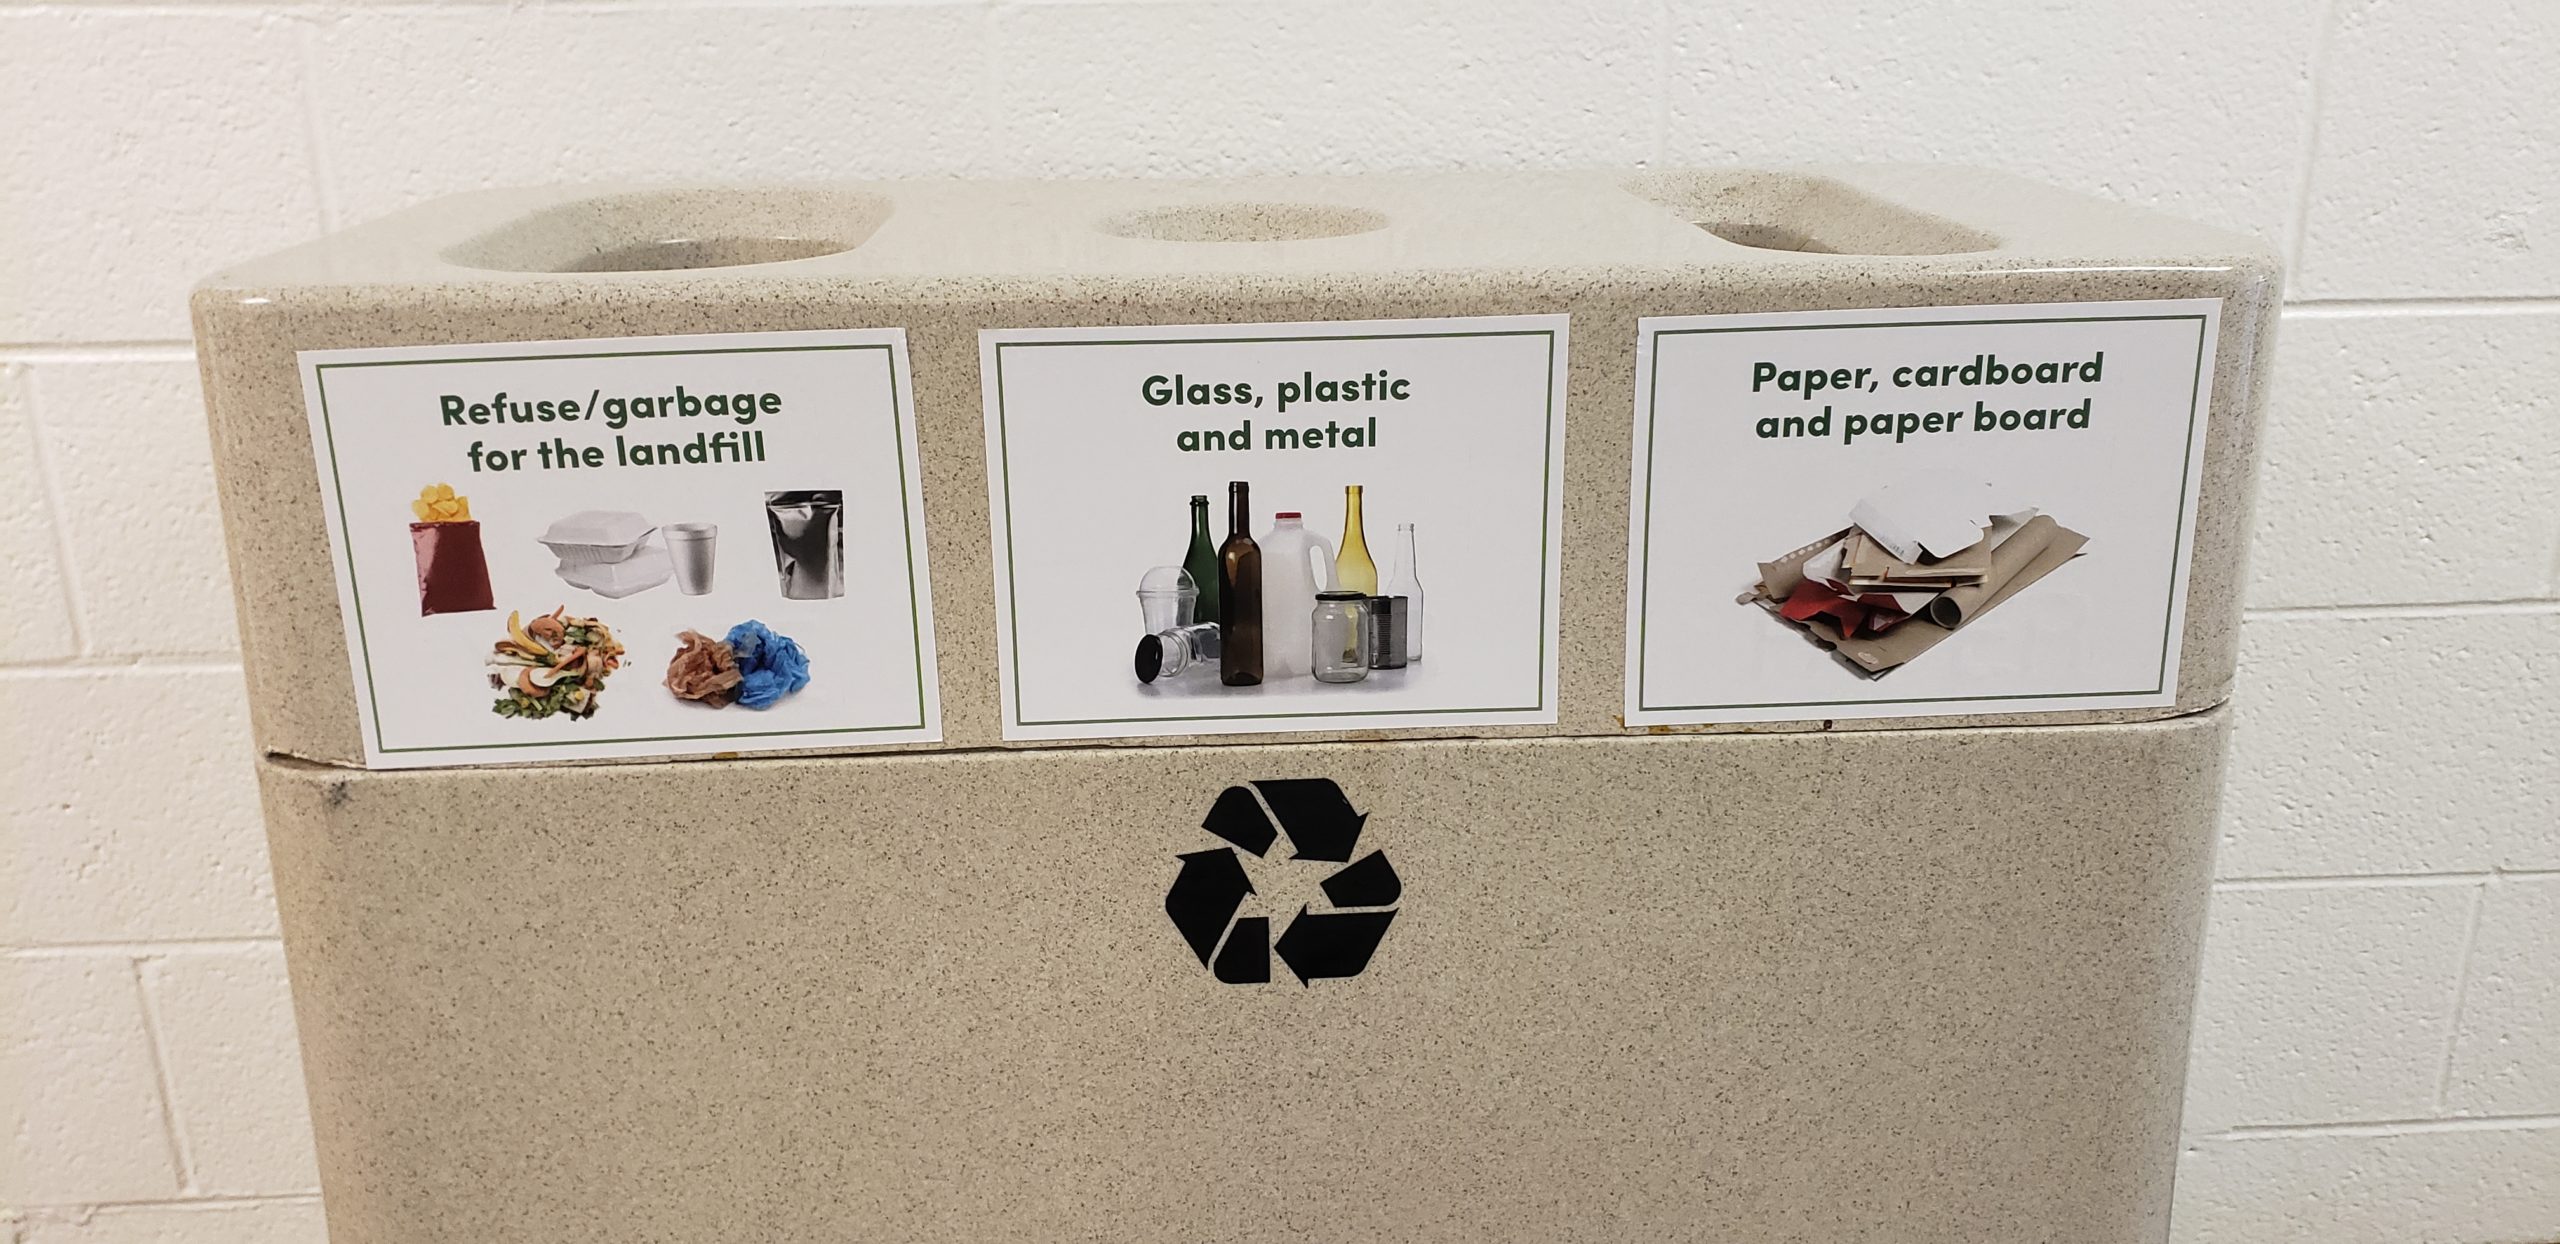 Recycling bin against a white cinderblock, with pictures of what can be recycled on each section of the bins.